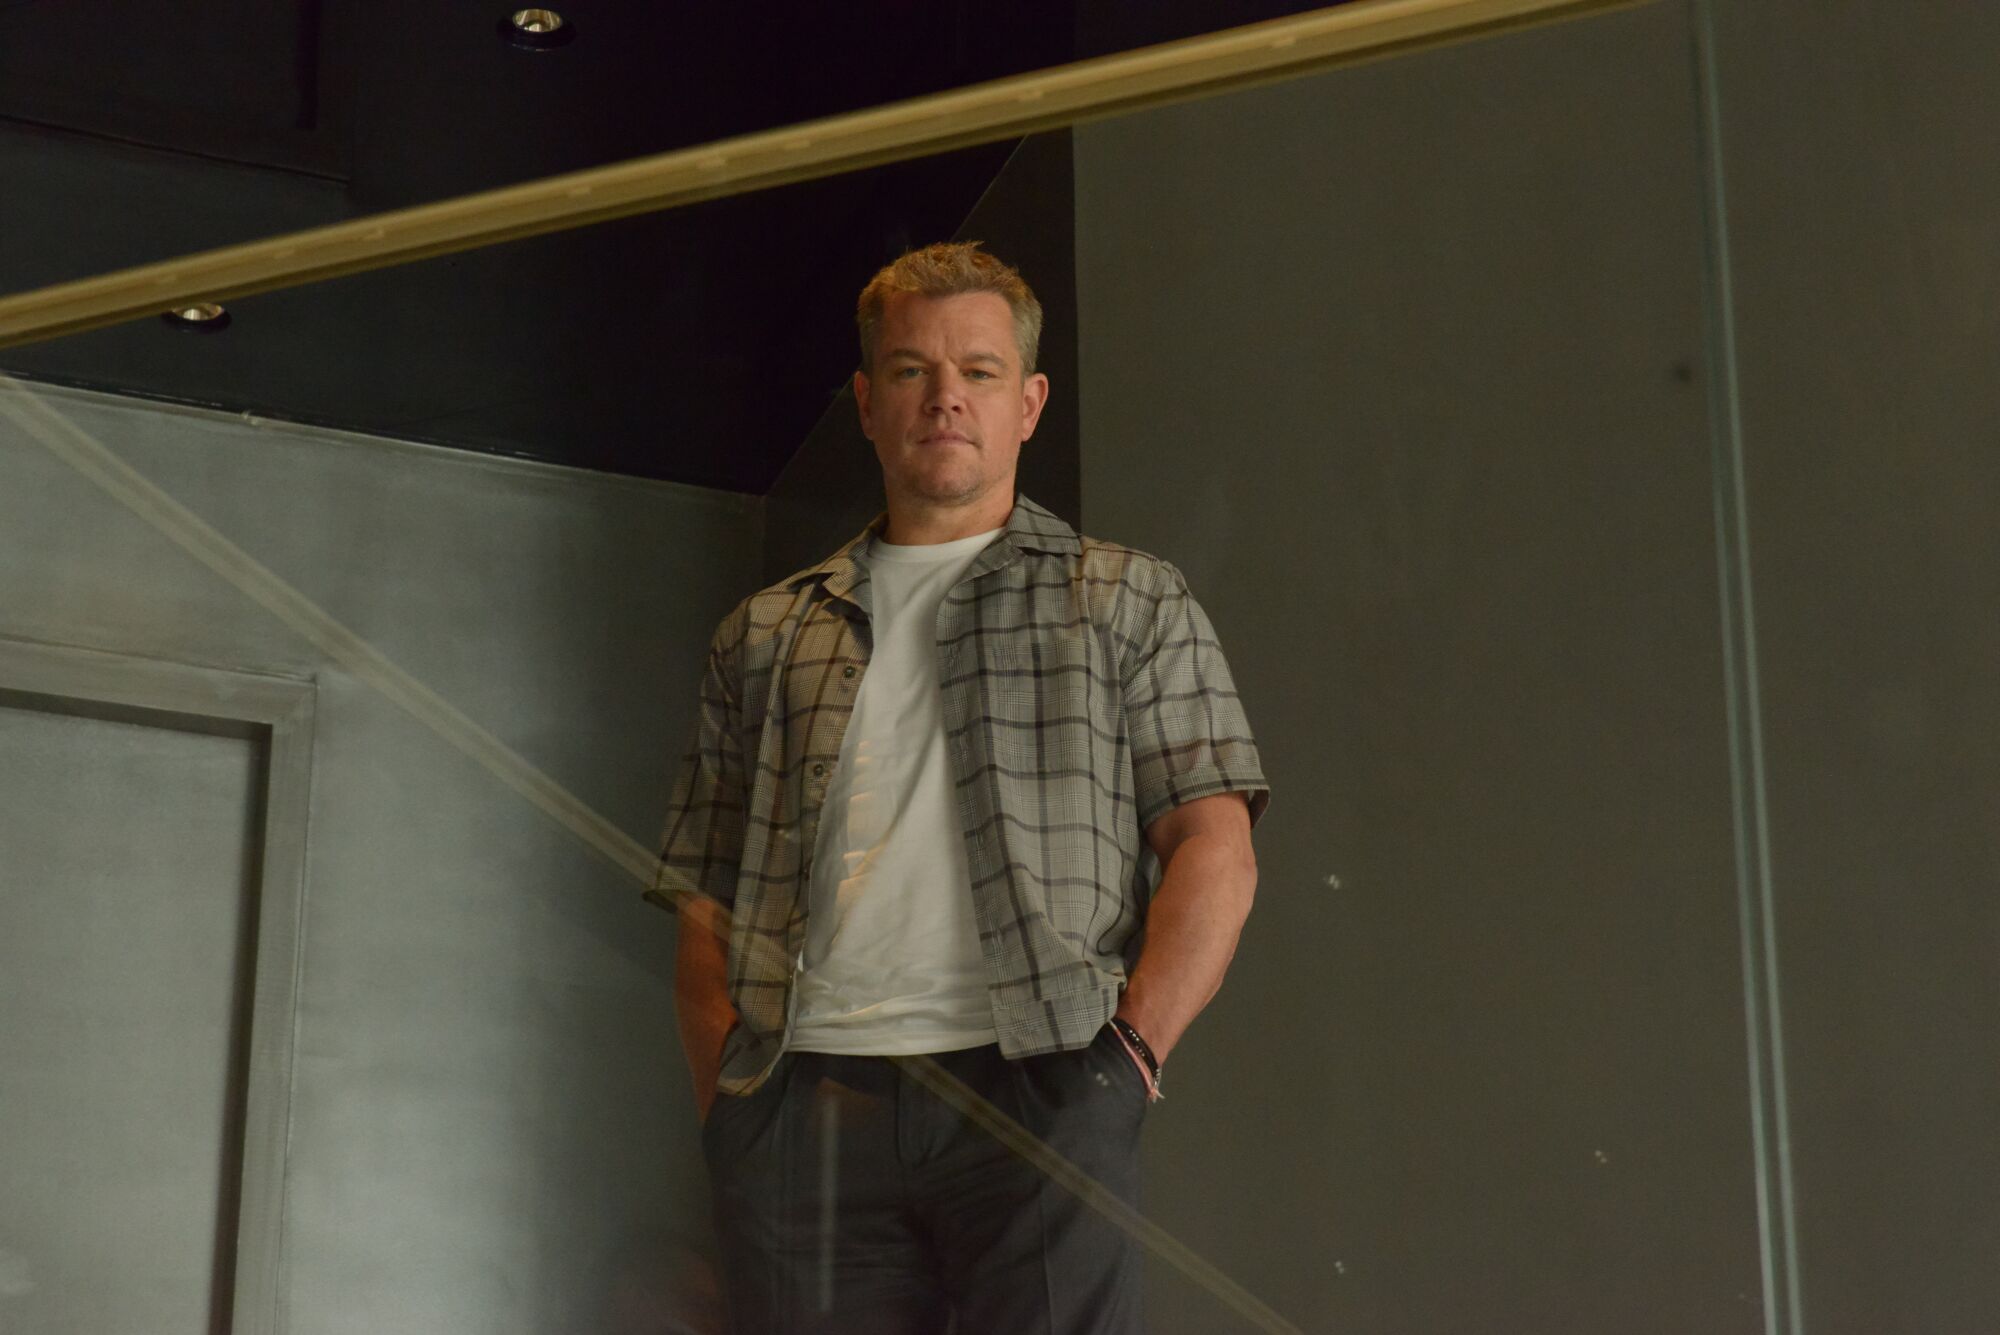 Matt Damon stands with his hands in his pockets.